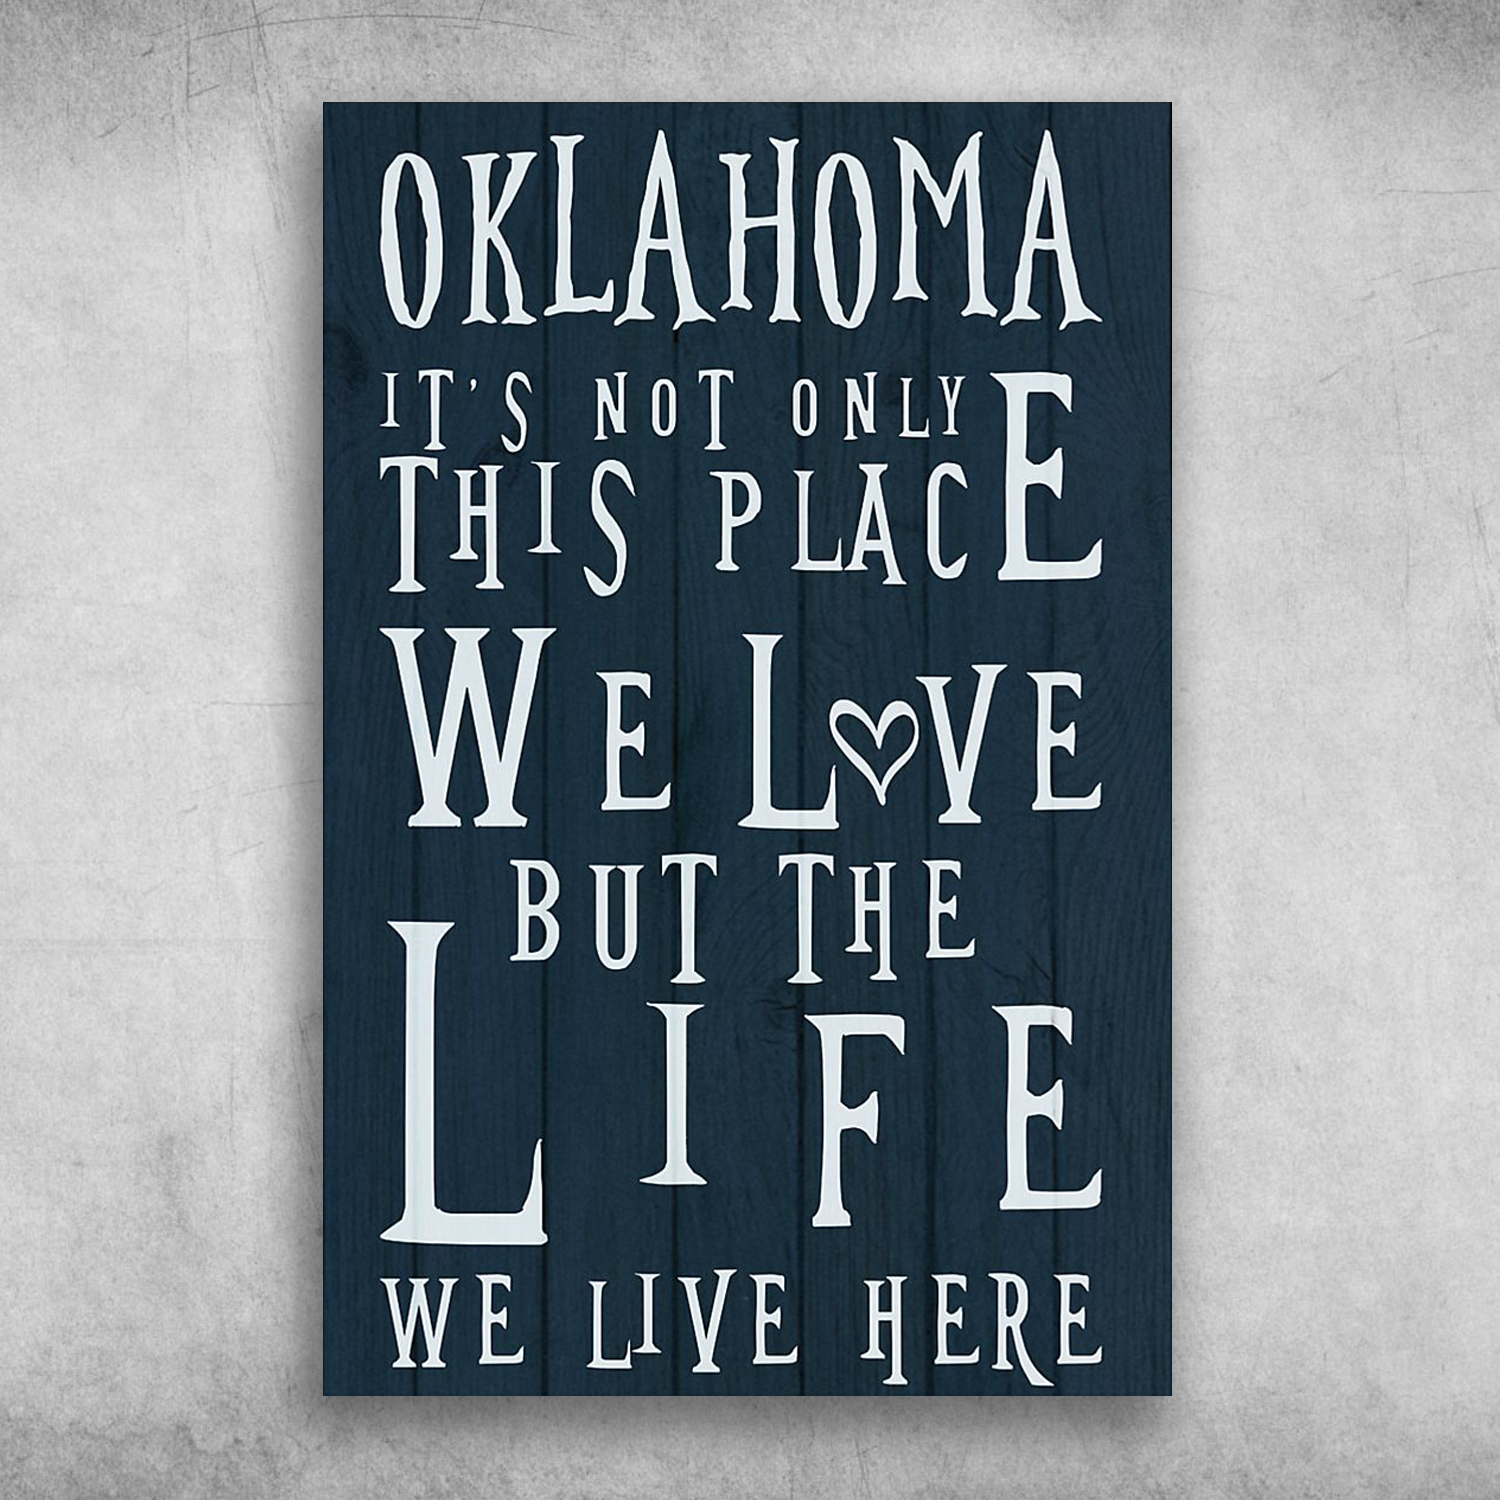 Oklahoma America It's Not Only This Place We Love